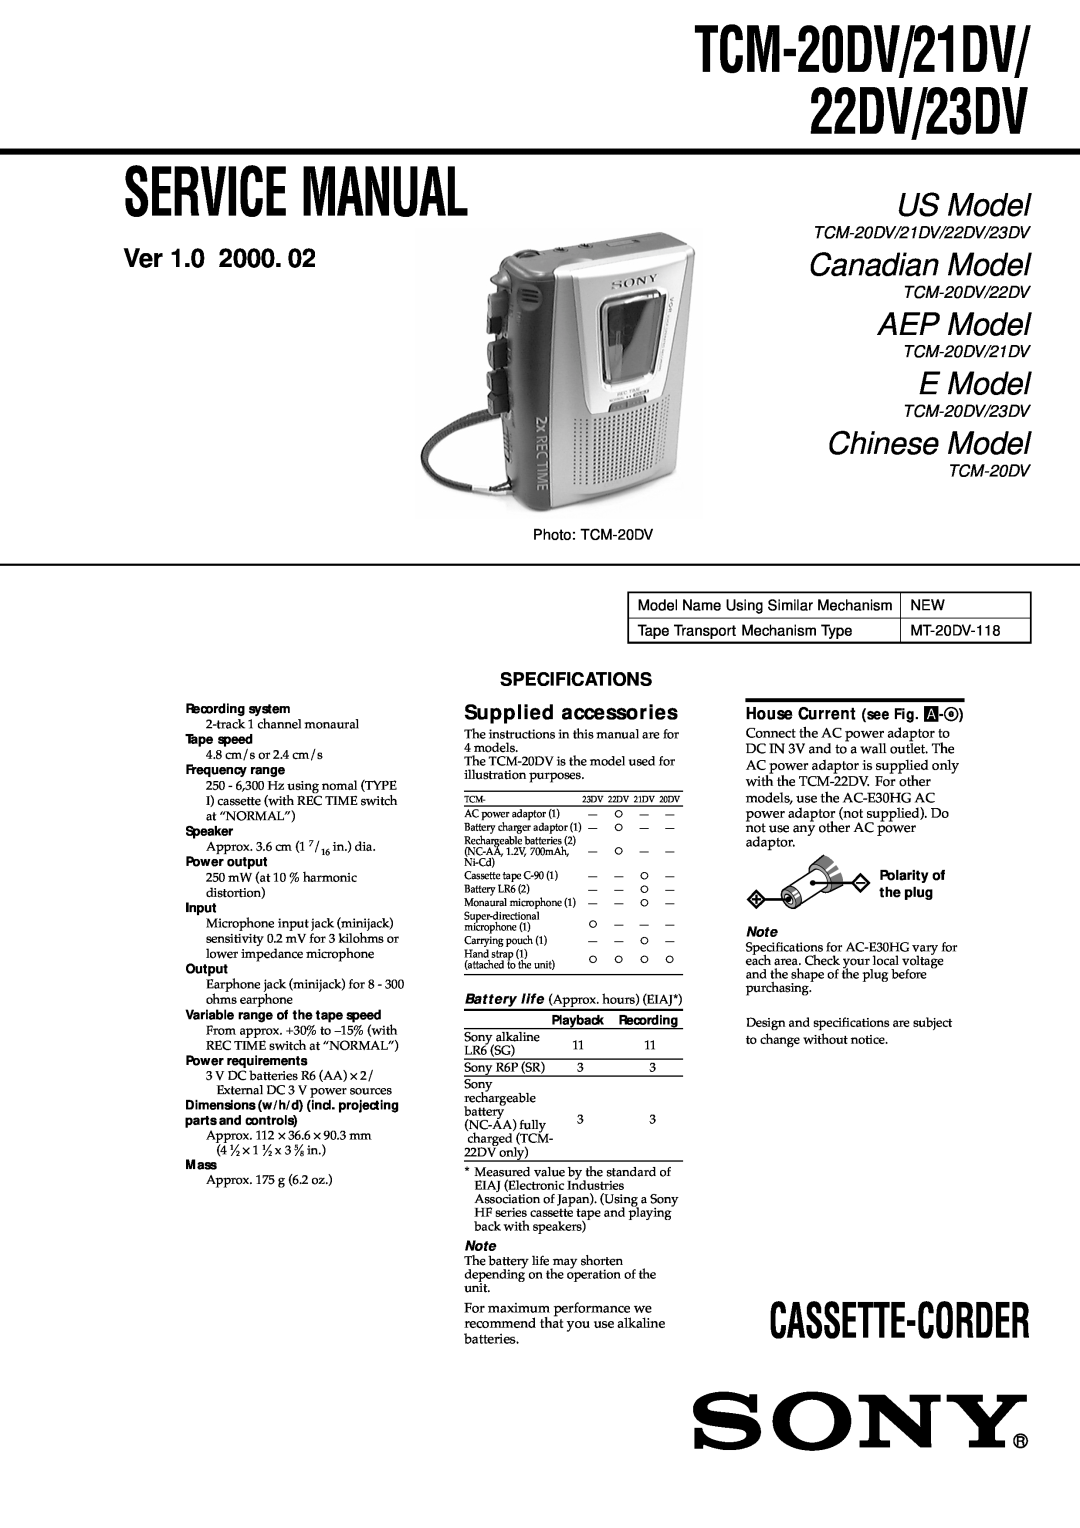 Sony service manual Supplied accessories, Service Manual, TCM-20DV/21DV/ 22DV/23DV, US Model, Canadian Model, AEP Model 